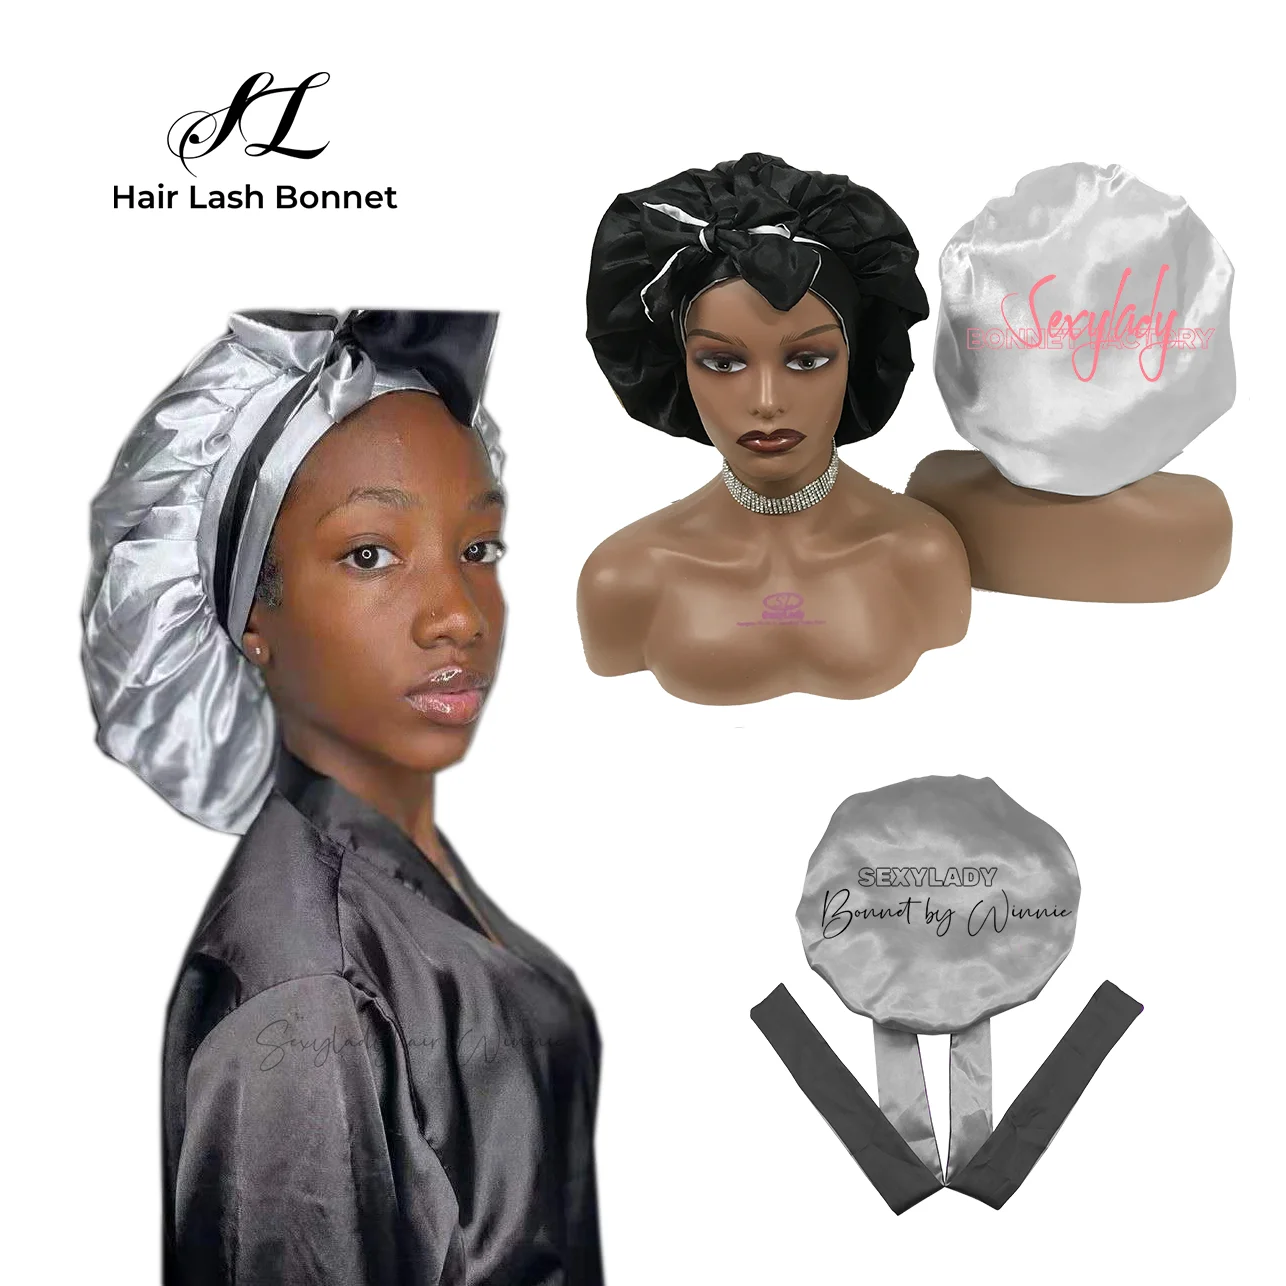 Wholesale free sample bonnets and satin hair wraps long band